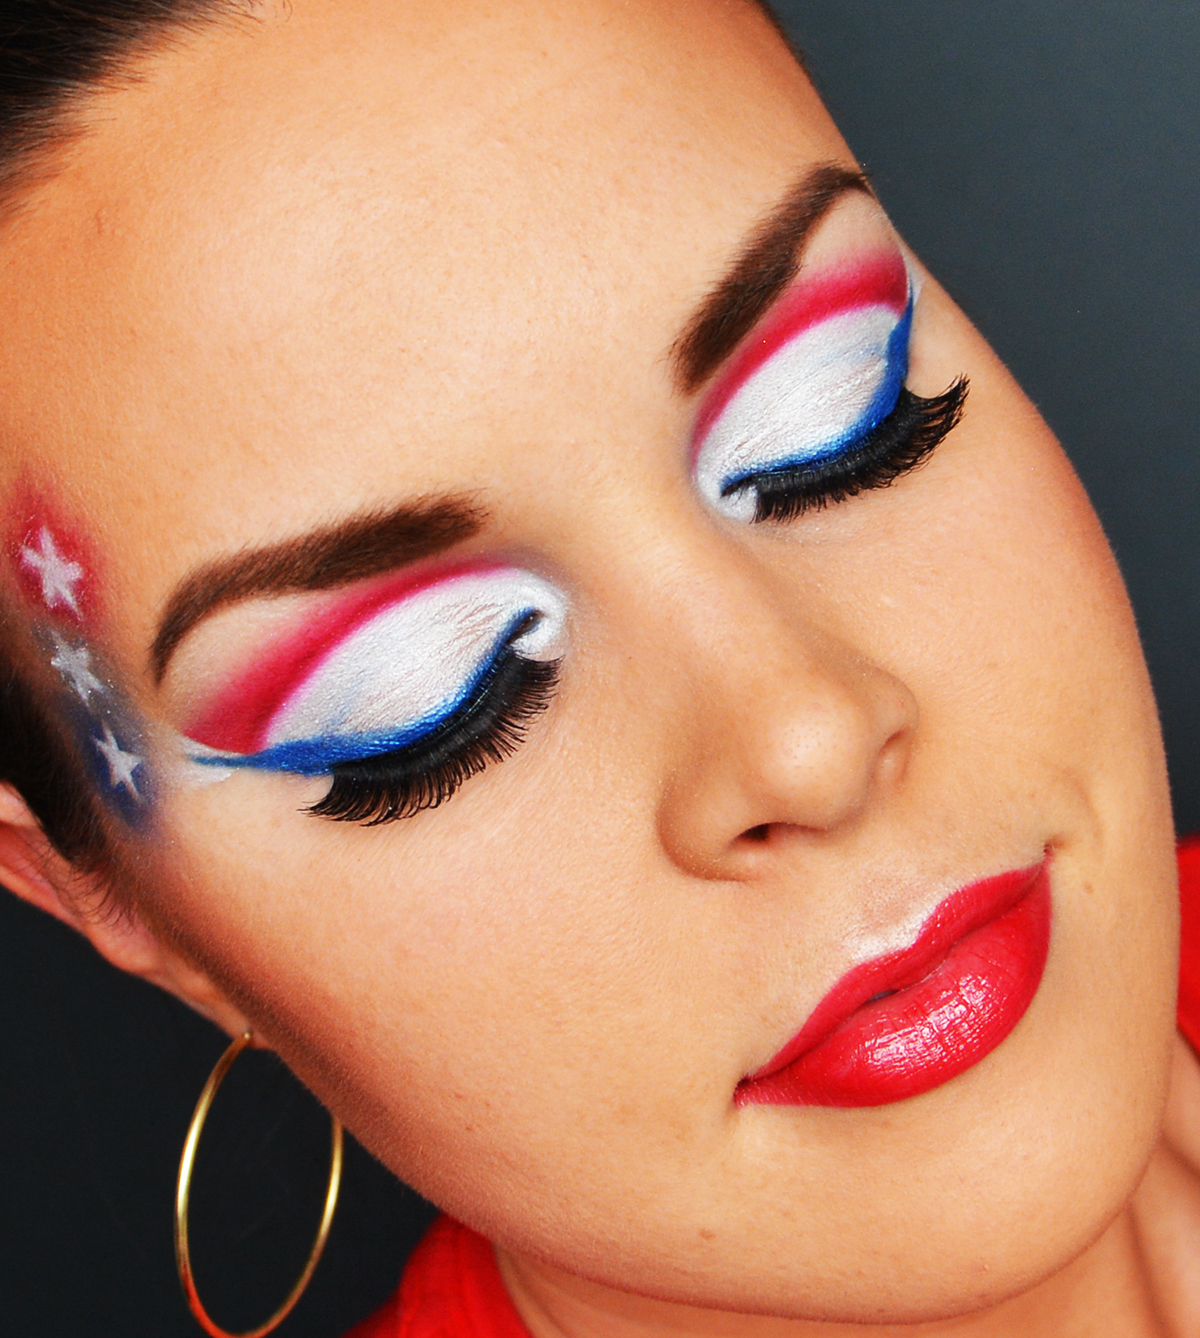 cute makeup ideas for 4th of july